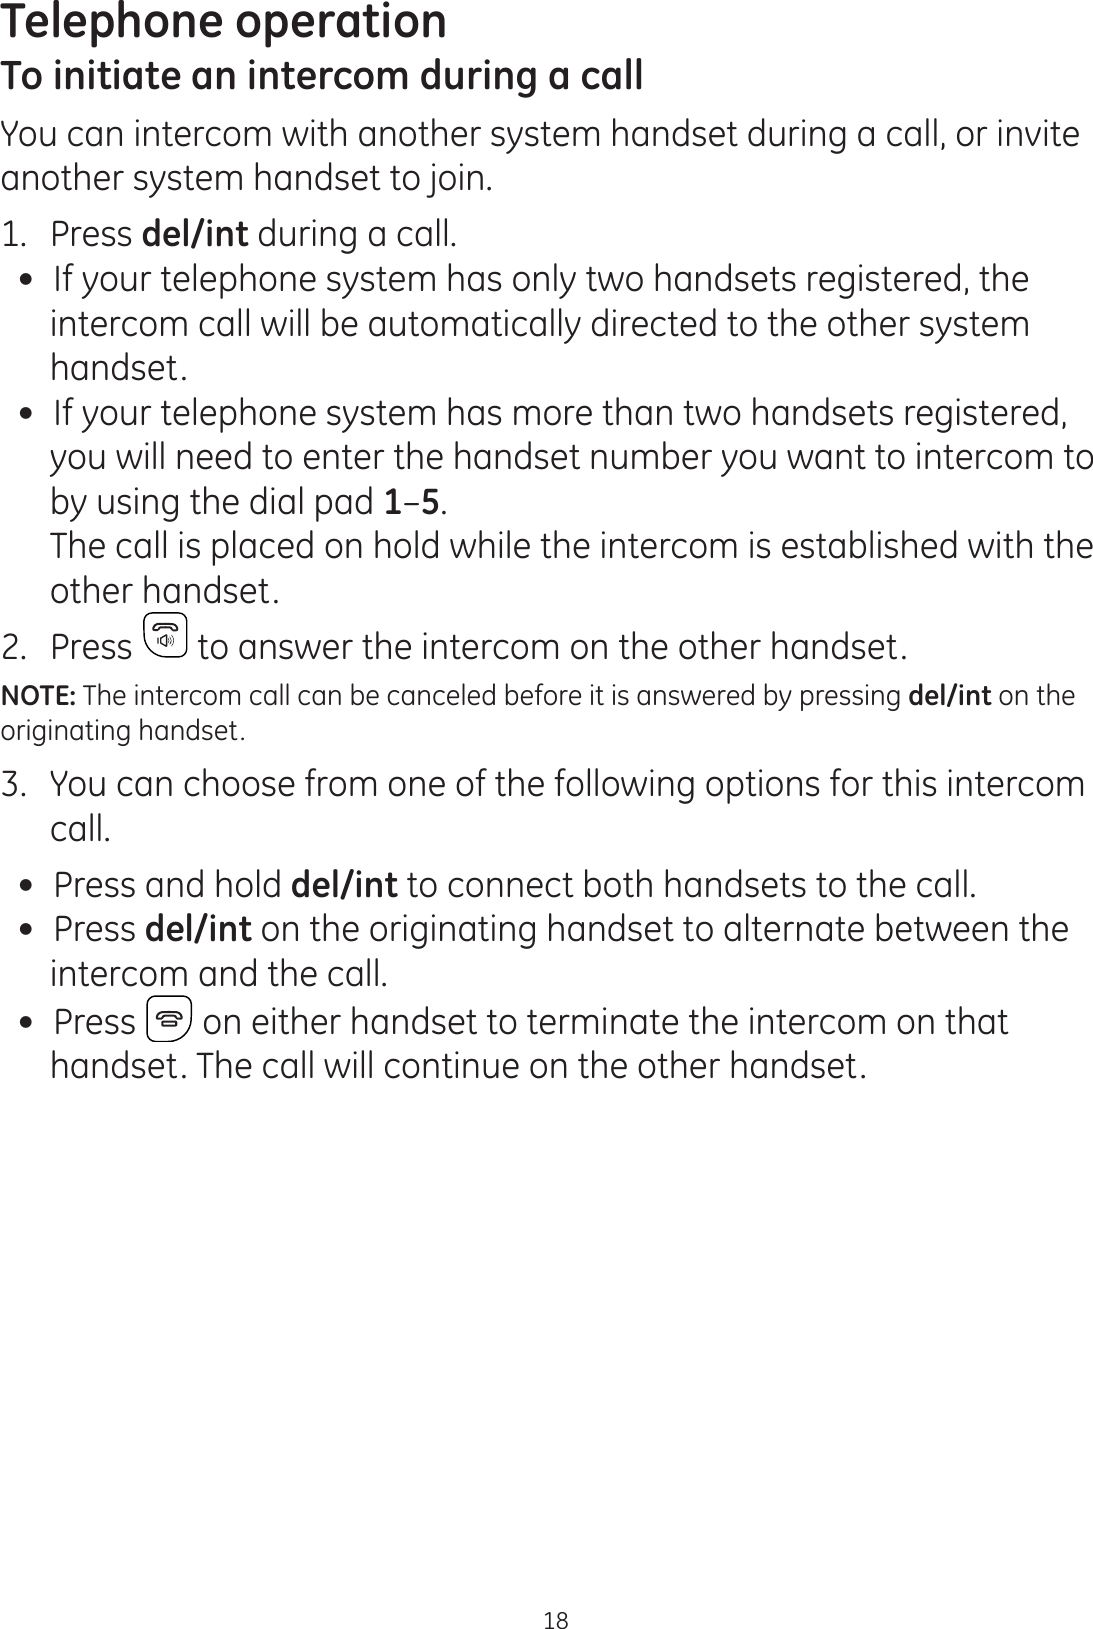 Telephone operation18To initiate an intercom during a callYou can intercom with another system handset during a call, or invite another system handset to join.1.  Press del/int during a call.  If your telephone system has only two handsets registered, the intercom call will be automatically directed to the other system handset. If your telephone system has more than two handsets registered,  you will need to enter the handset number you want to intercom to  by using the dial pad 1–5.   The call is placed on hold while the intercom is established with the other handset.2.  Press  to answer the intercom on the other handset. NOTE: The intercom call can be canceled before it is answered by pressing del/int on the originating handset.3.  You can choose from one of the following options for this intercom call.  Press and hold del/int to connect both handsets to the call. Press del/int on the originating handset to alternate between the intercom and the call.  Press   on either handset to terminate the intercom on that handset. The call will continue on the other handset.